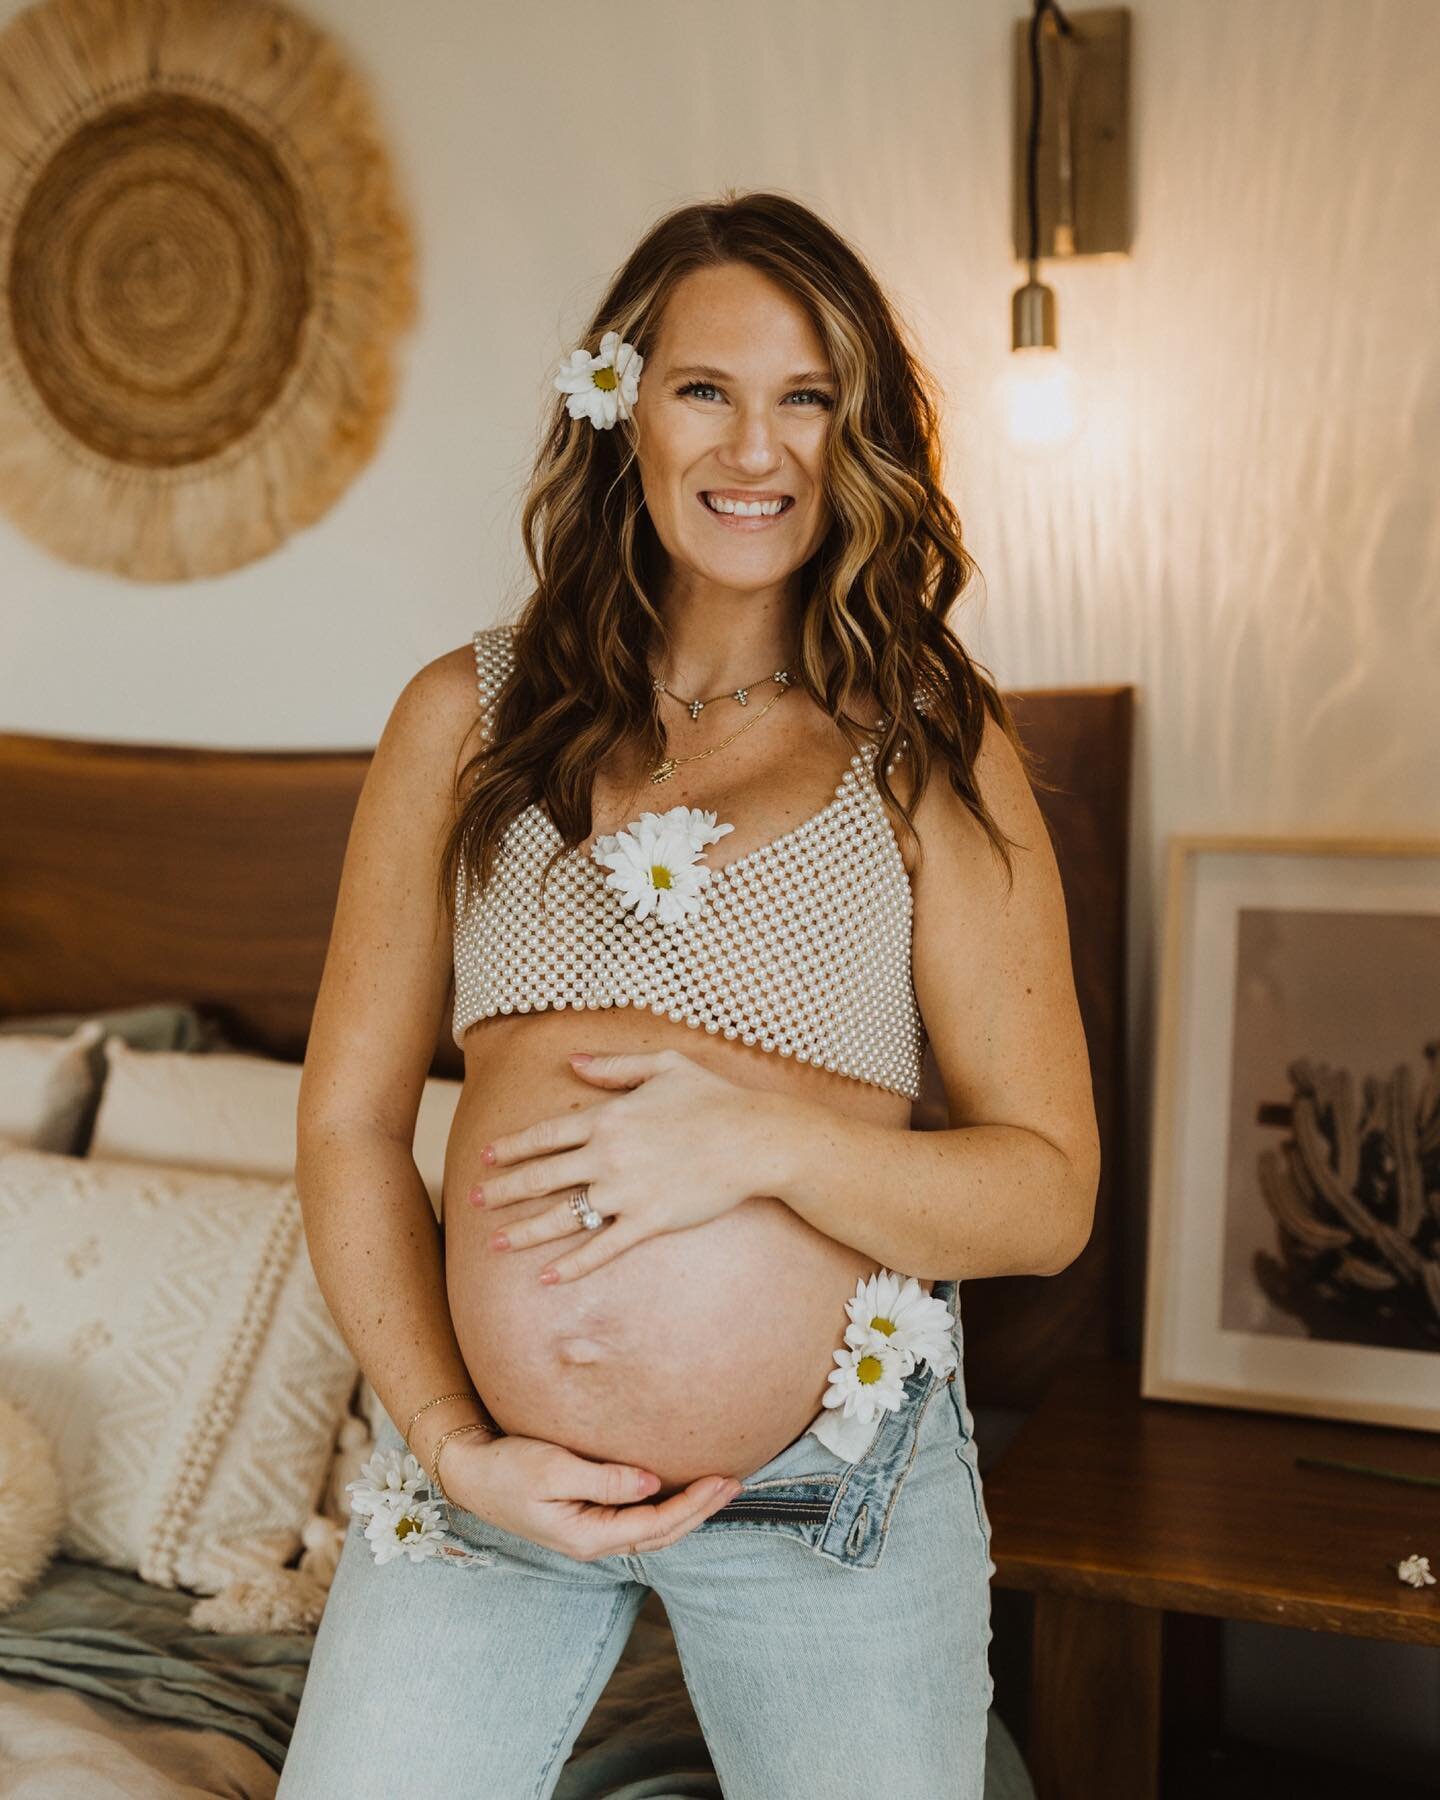 Mamaaaa 🌼 had so much fun taking Elise&rsquo;s maternity photos 🥹 A total babe and always down to bounce fun ideas around with me. I also learned that she is amazing at playing piano! What?! I made her play for me. Thankful for her sweet, creative 